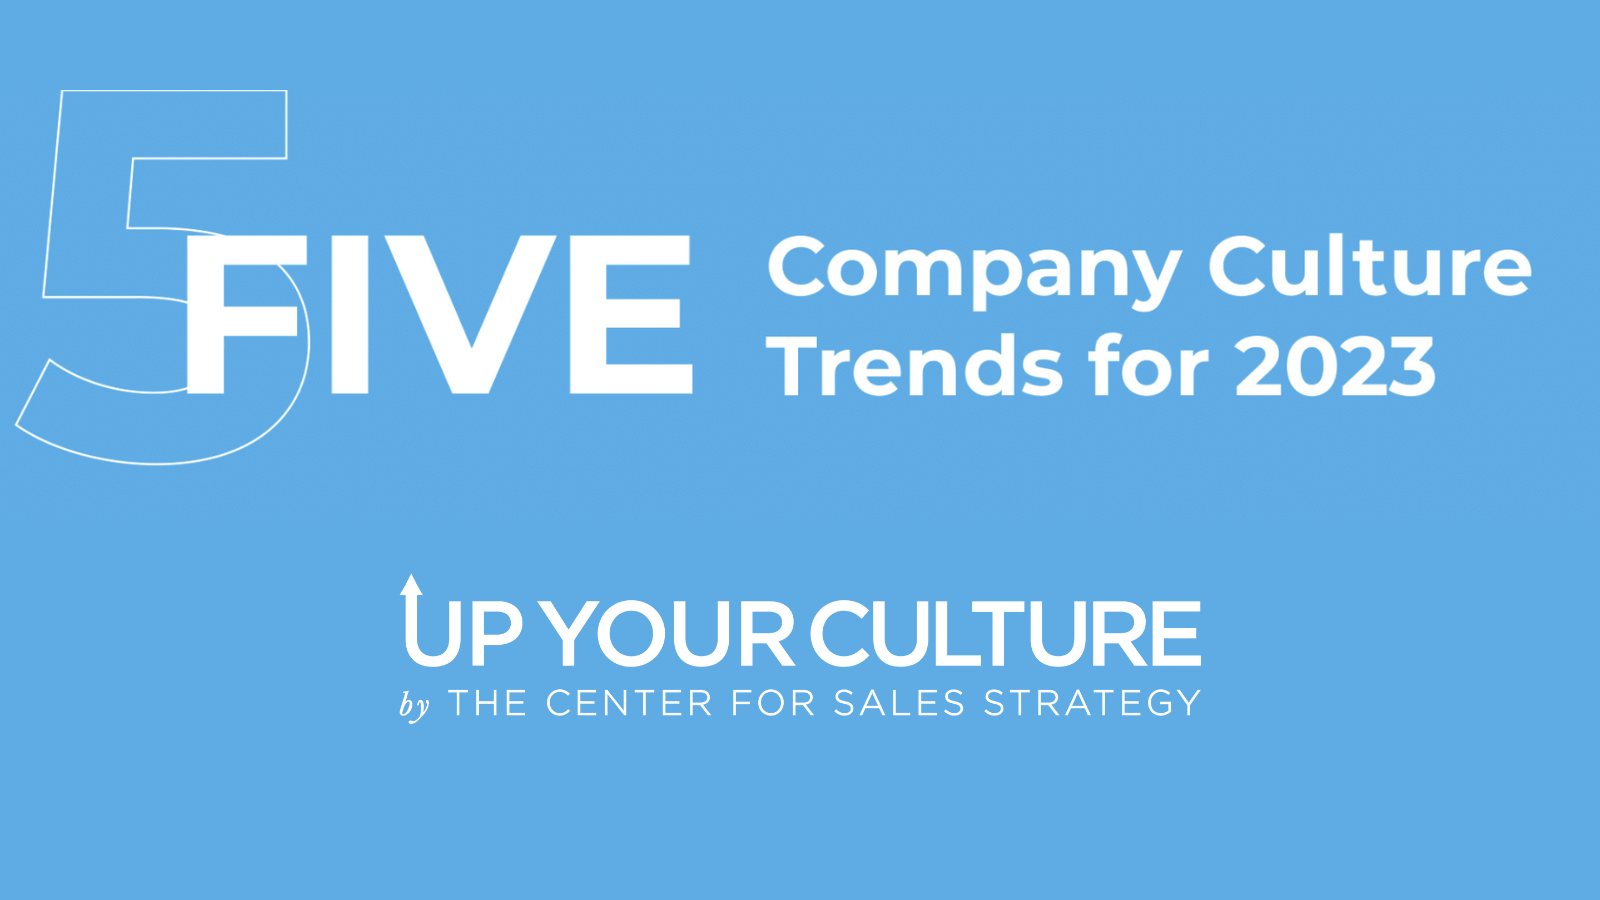 [INFOGRAPHIC] 5 Company Culture Trends for 2023